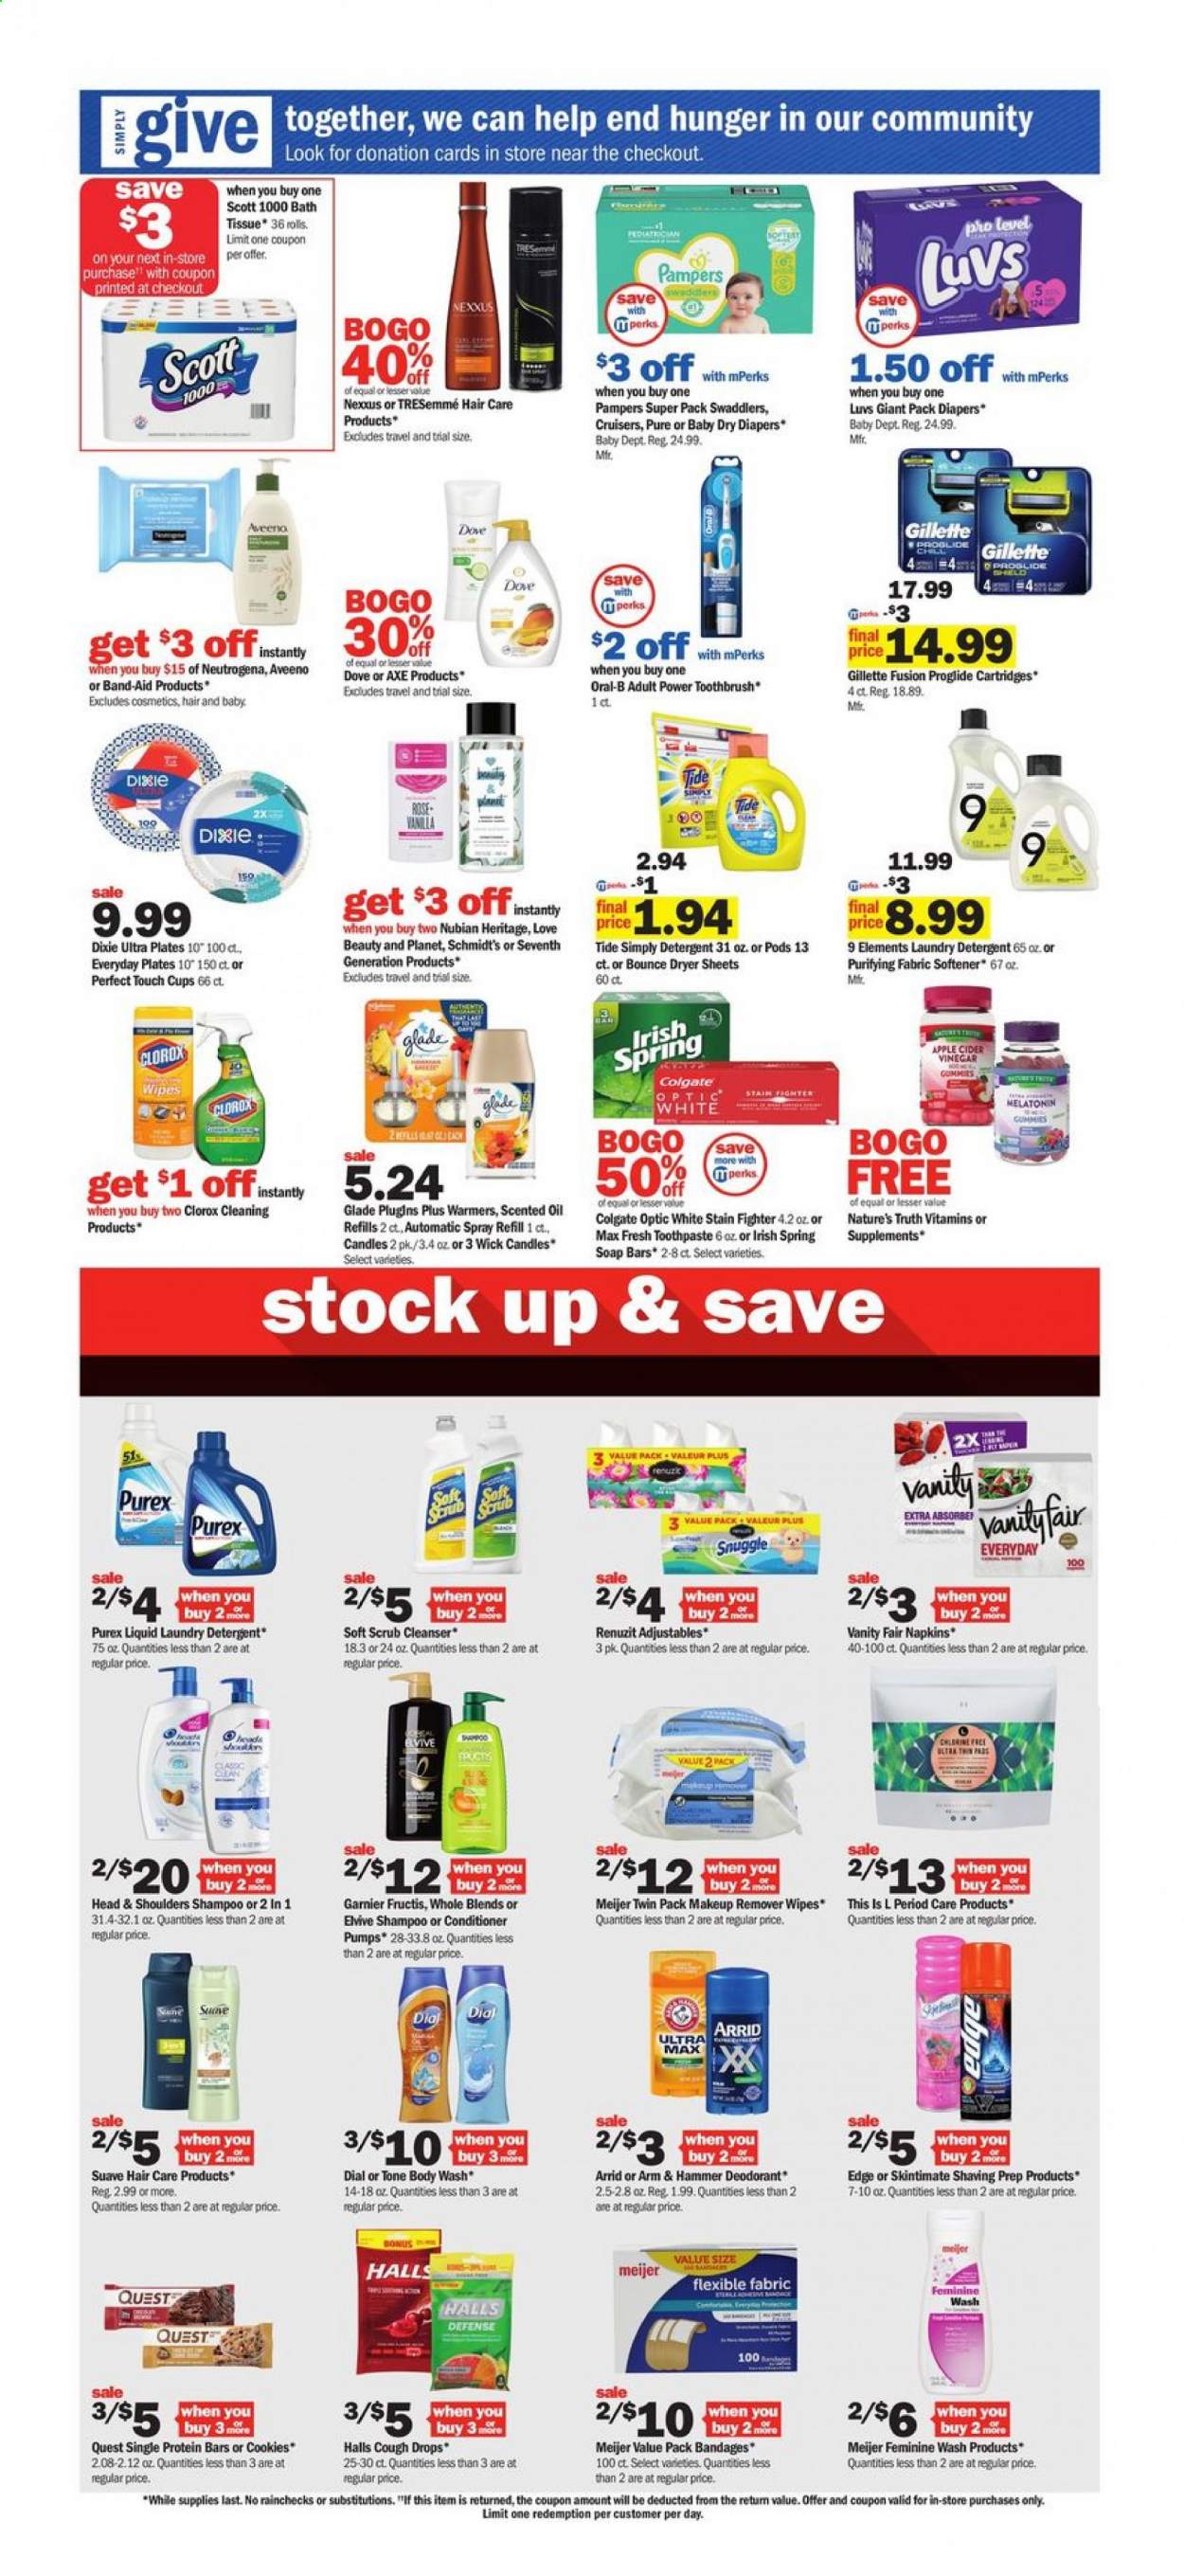 thumbnail - Meijer Flyer - 06/13/2021 - 06/19/2021 - Sales products - Scott, cookies, Halls, ARM & HAMMER, protein bar, vinegar, oil, wine, rosé wine, wipes, Pampers, napkins, nappies, Aveeno, bath tissue, detergent, Clorox, Snuggle, Tide, fabric softener, laundry detergent, Bounce, dryer sheets, Purex, body wash, Dove, shampoo, Suave, Dial, soap, Colgate, toothbrush, Oral-B, toothpaste, cleanser, Garnier, Neutrogena, conditioner, TRESemmé, Head & Shoulders, Nexxus, Fructis, anti-perspirant, deodorant, Gillette, plate, cup, candle, Renuzit, Glade, scented oil, Melatonin, Nature's Truth, cough drops, makeup remover. Page 16.